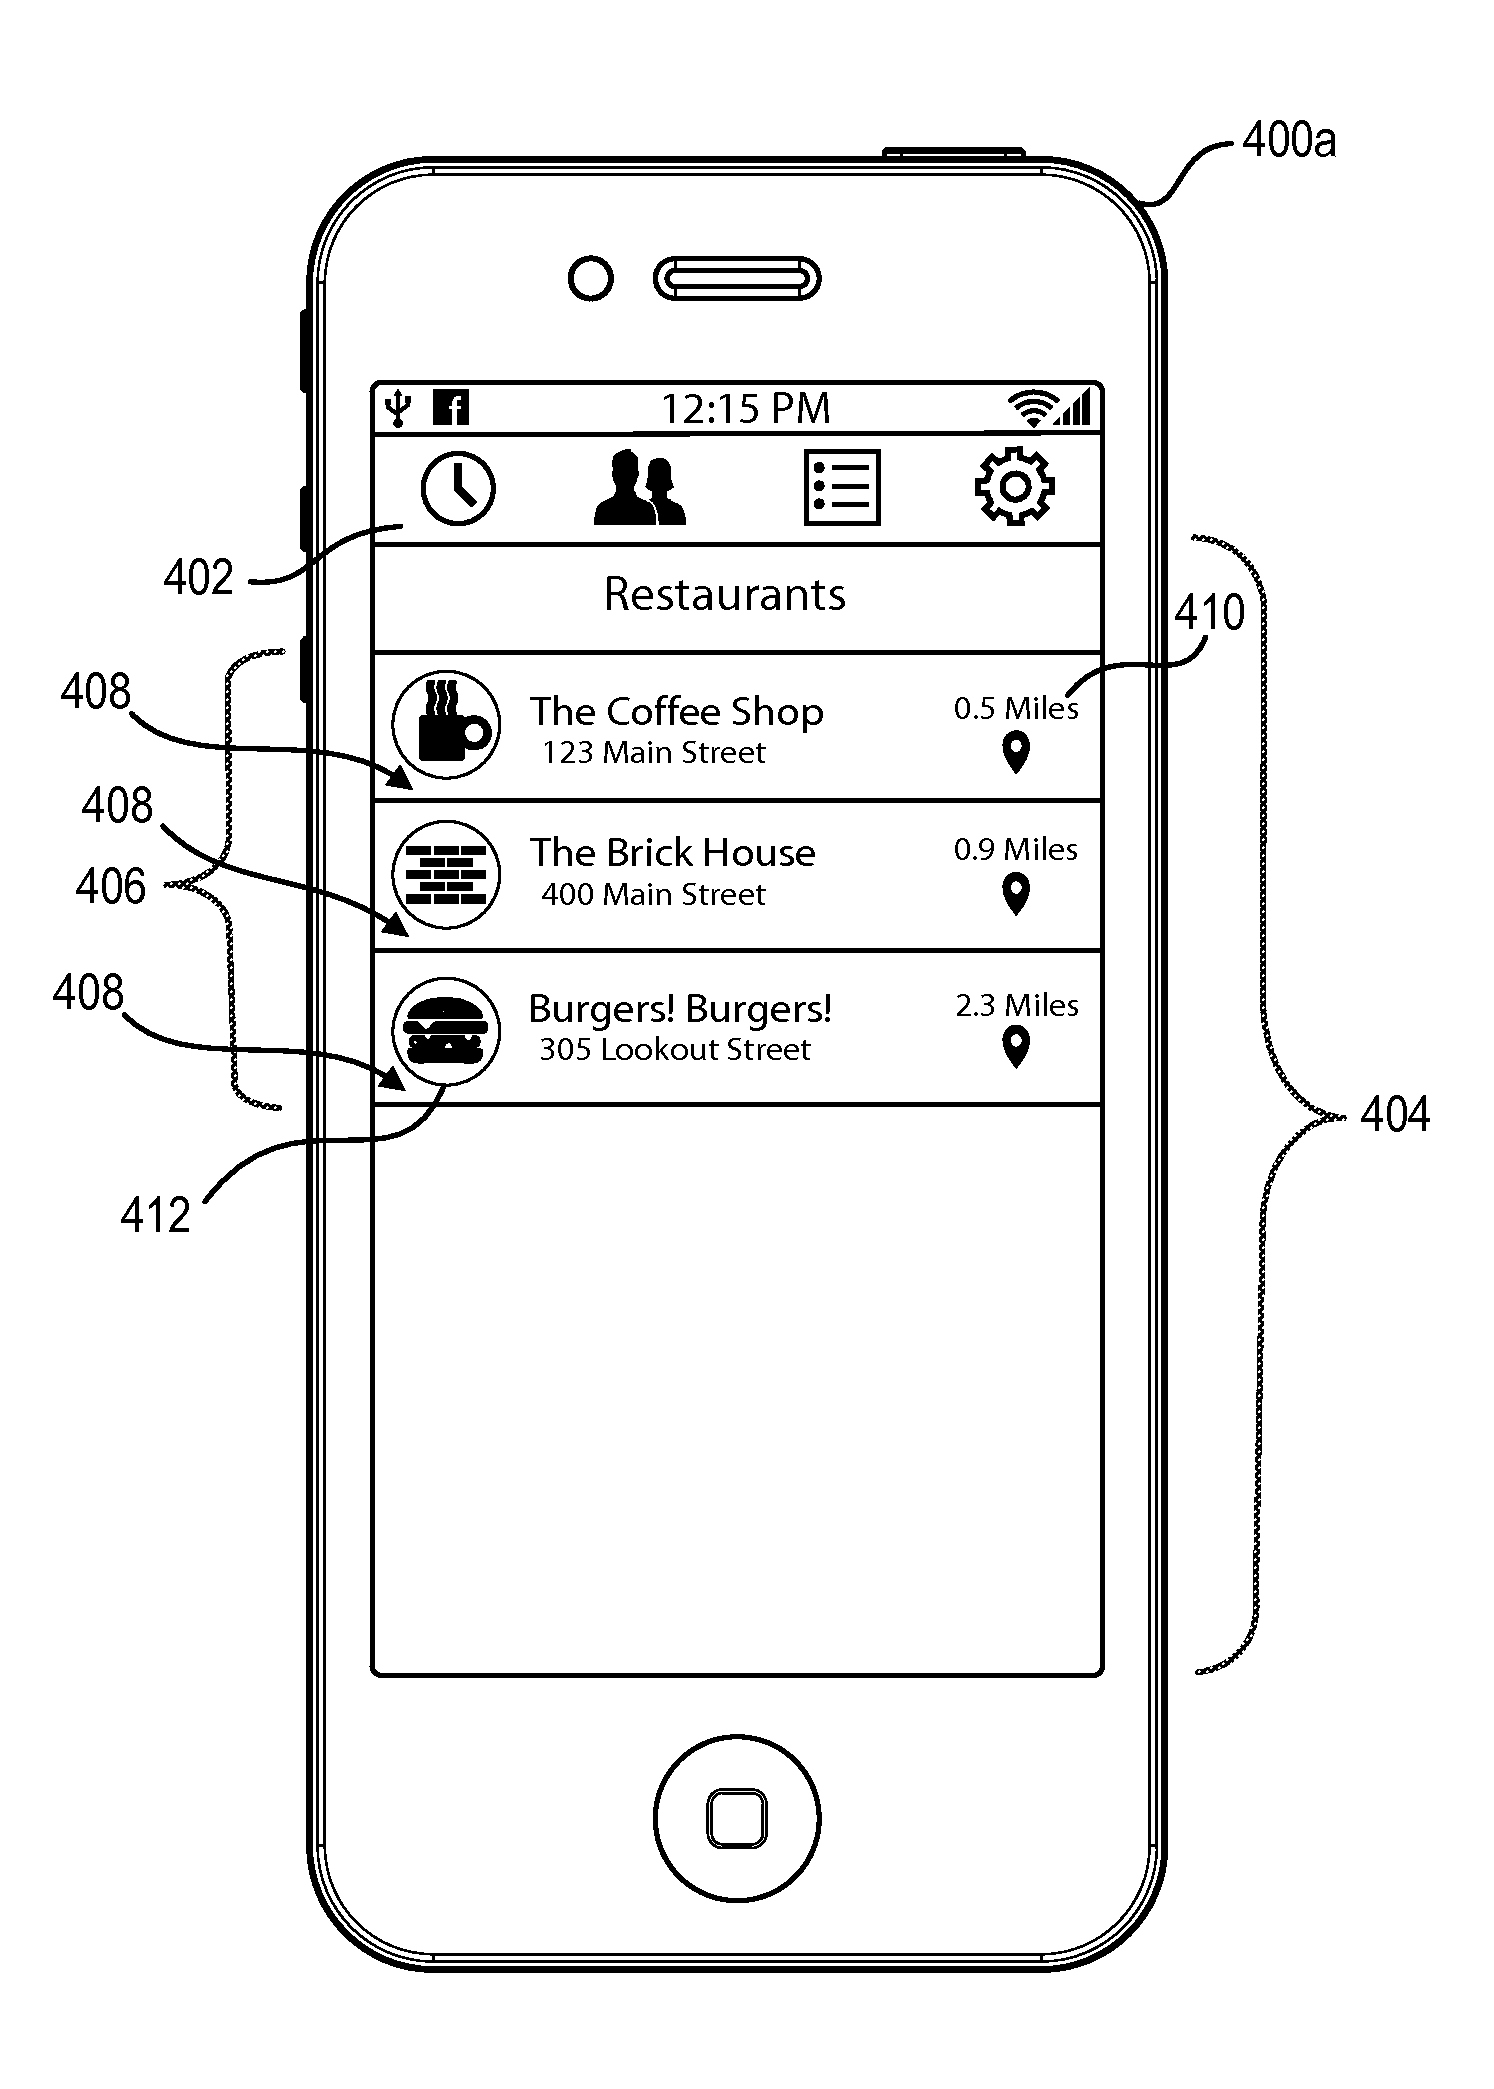 Facilitating sending and receiving of peer-to-business payments